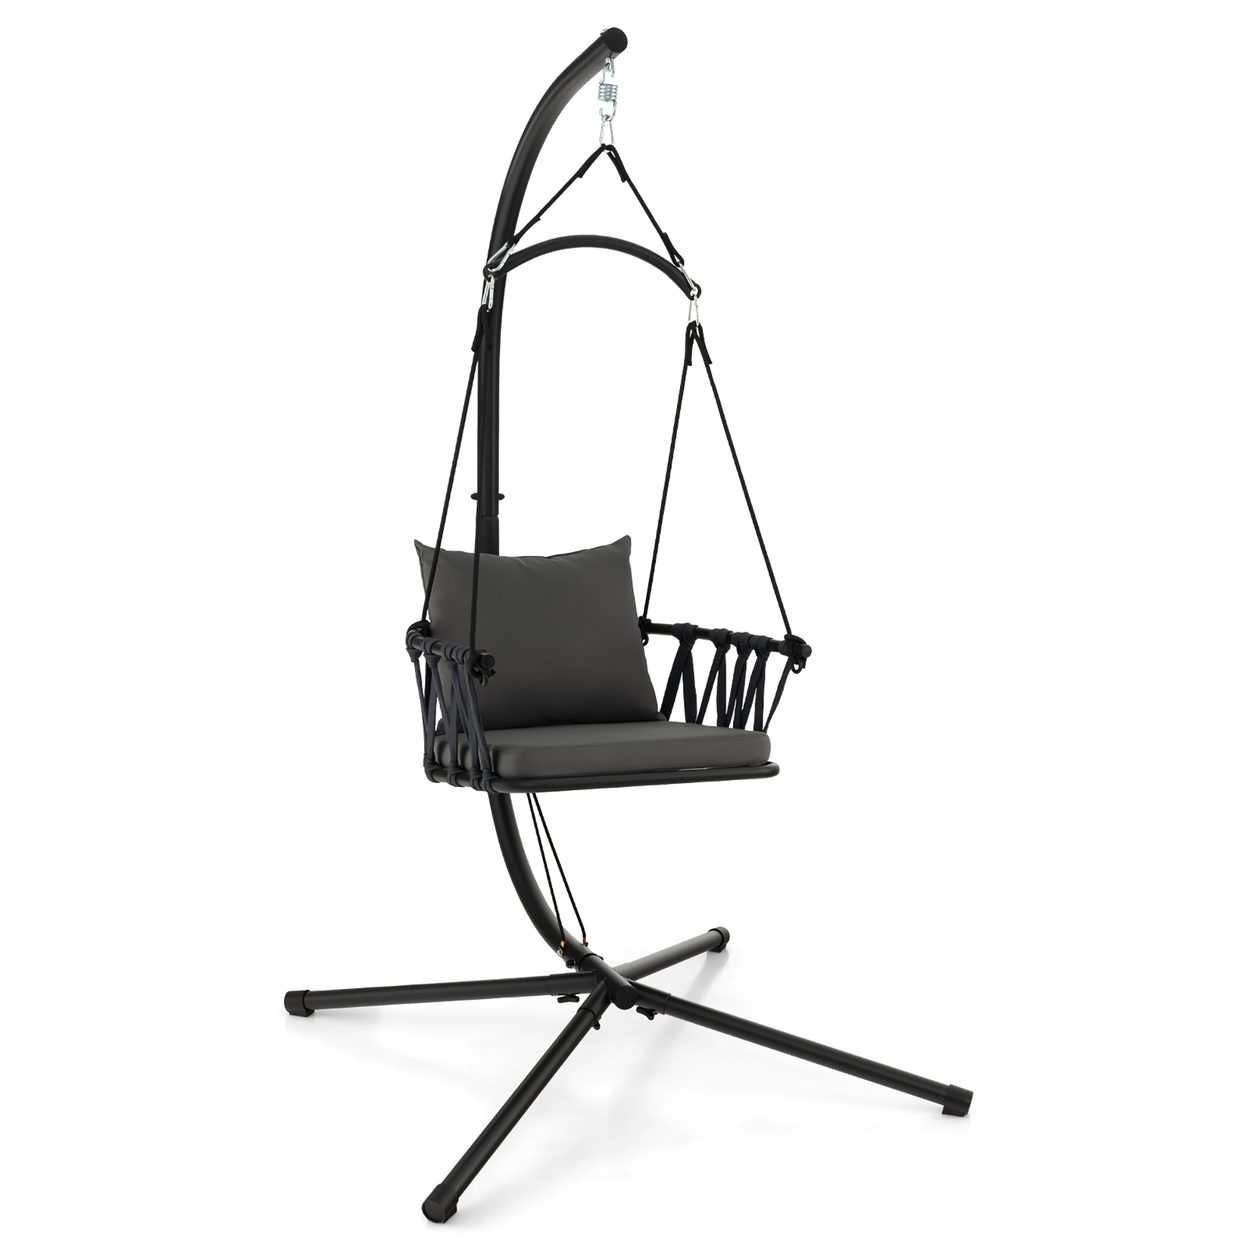 Swing Chair W/ Stand Patio Hanging Swing Chair W/ Comfortable Seat & Back Cushions